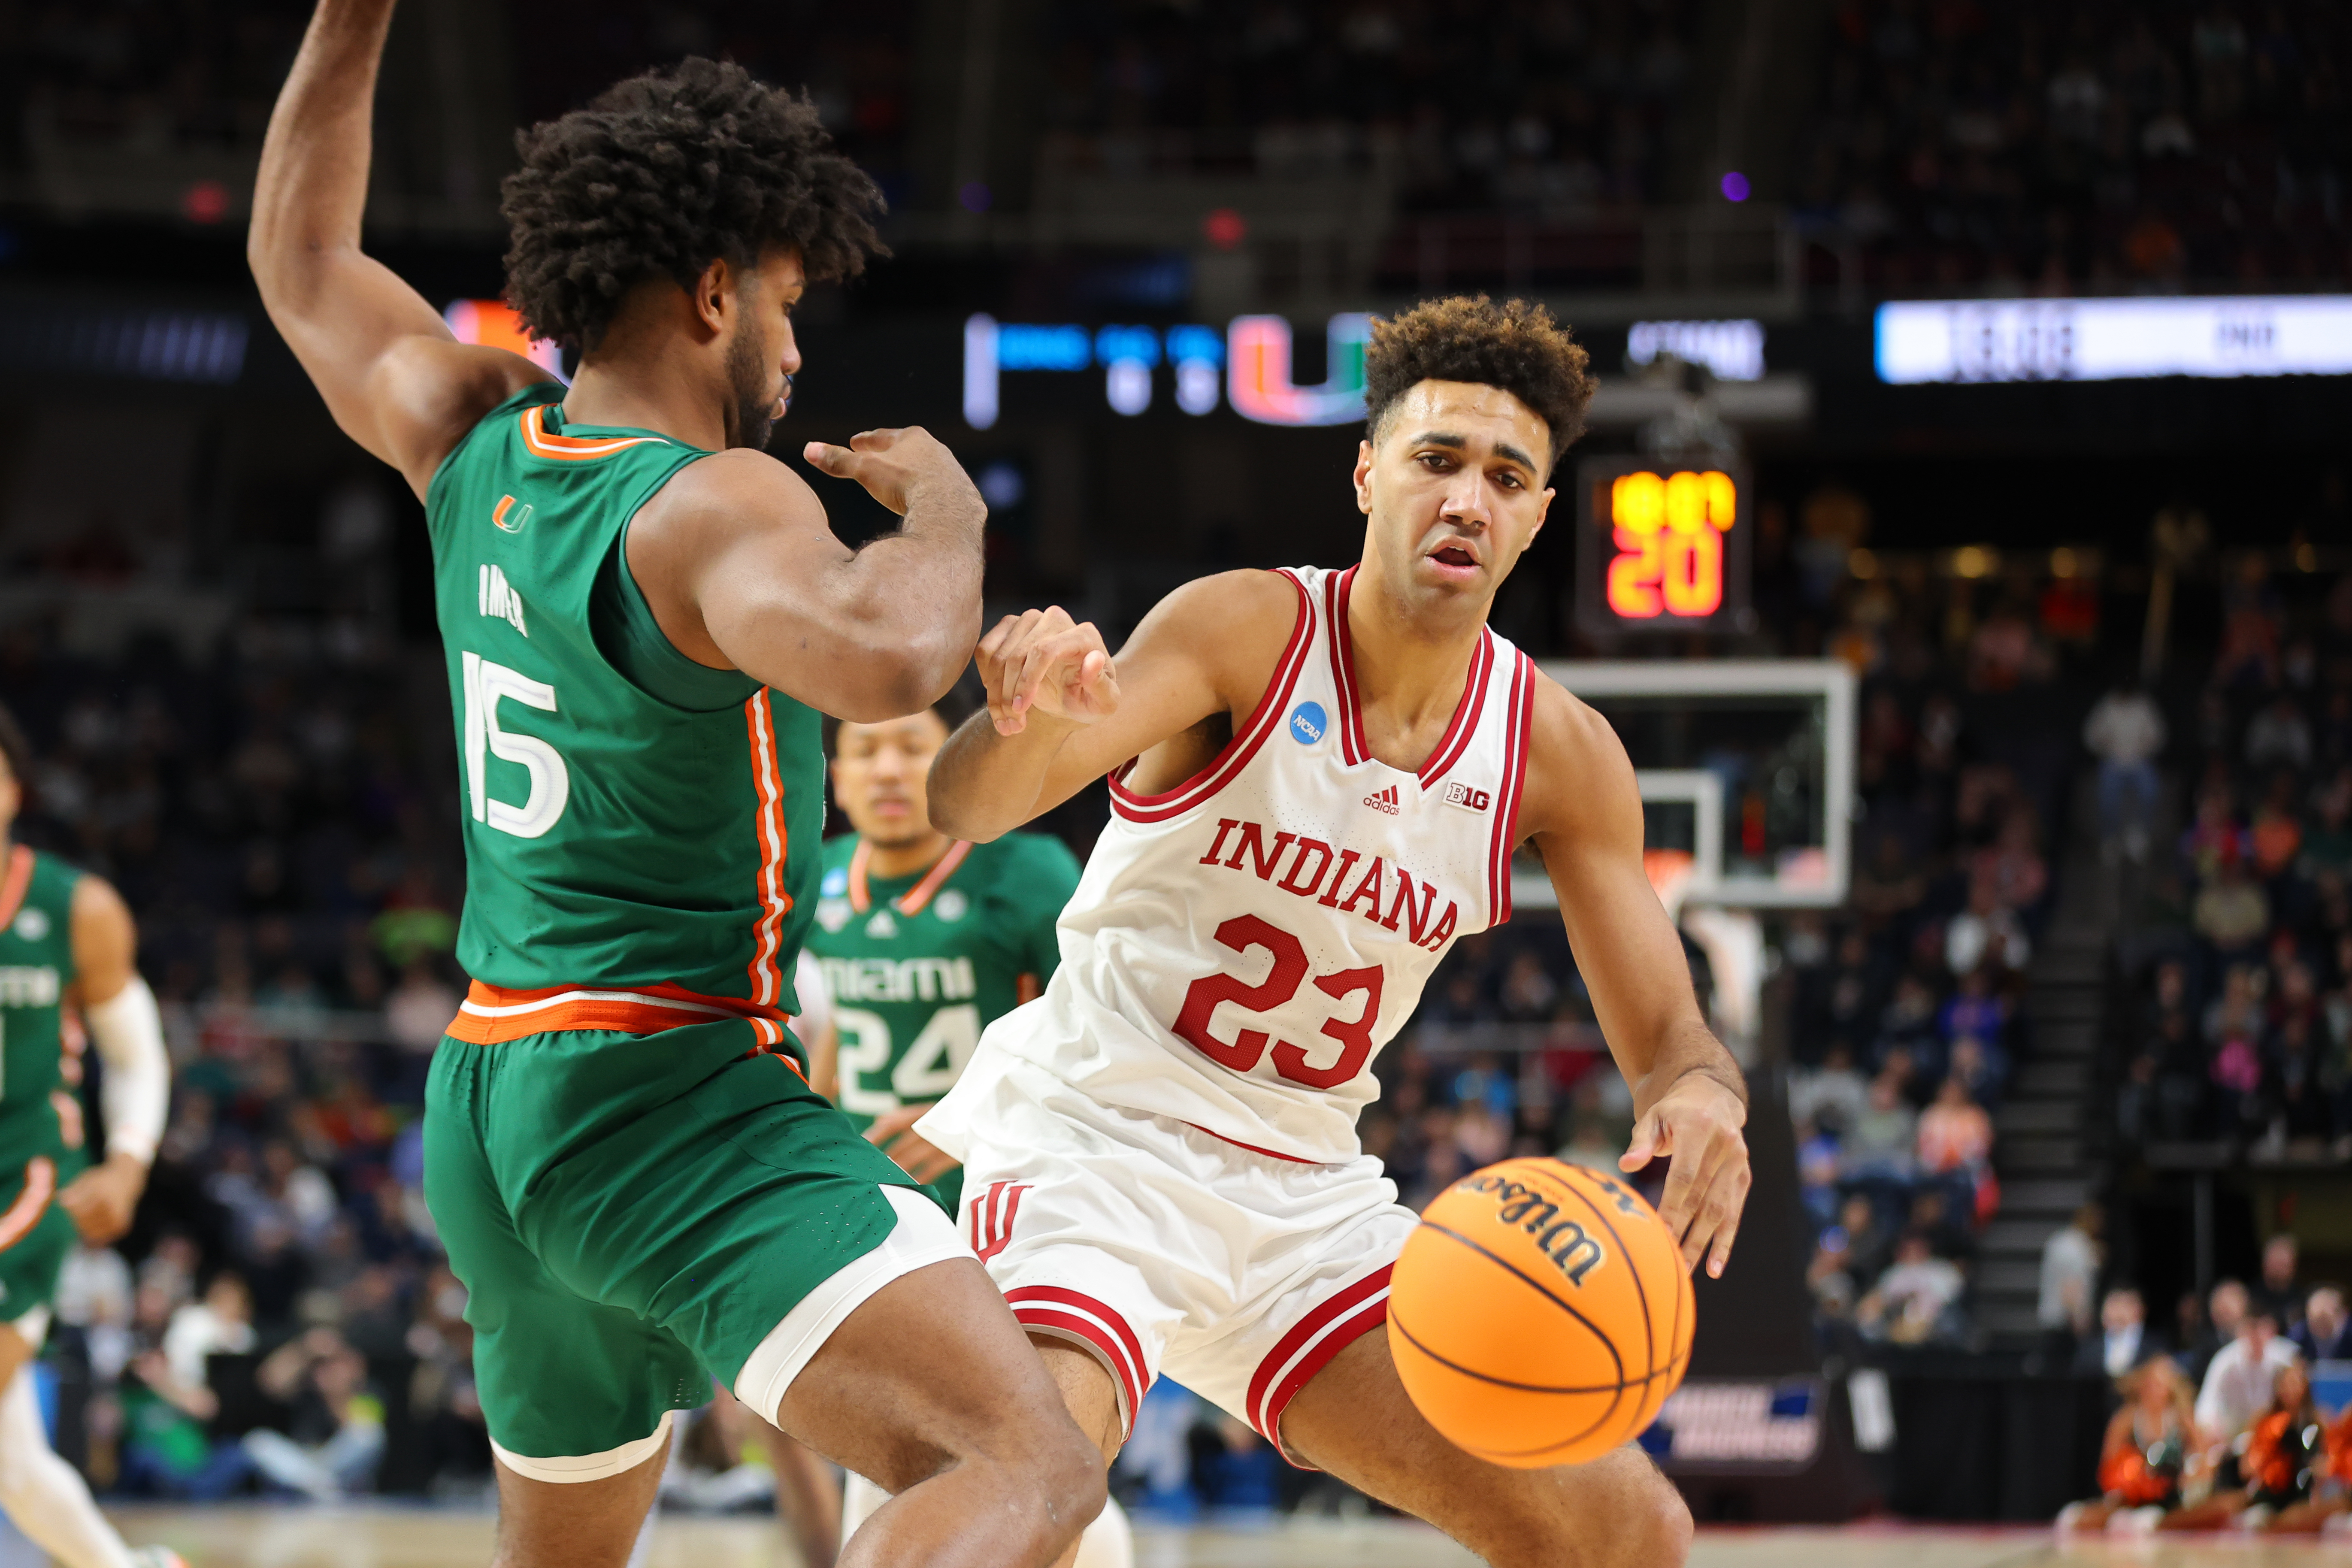 ALBANY, NY - MARCH 19: Trayce Jackson-Davis #23 of the Indiana Hoosiers dribbles against Norchad Omier #15 of the Miami Hurricanes during the second round of the 2023 NCAA Men’s Basketball Tournament held at MVP Arena on March 19, 2023 in Albany, New York.